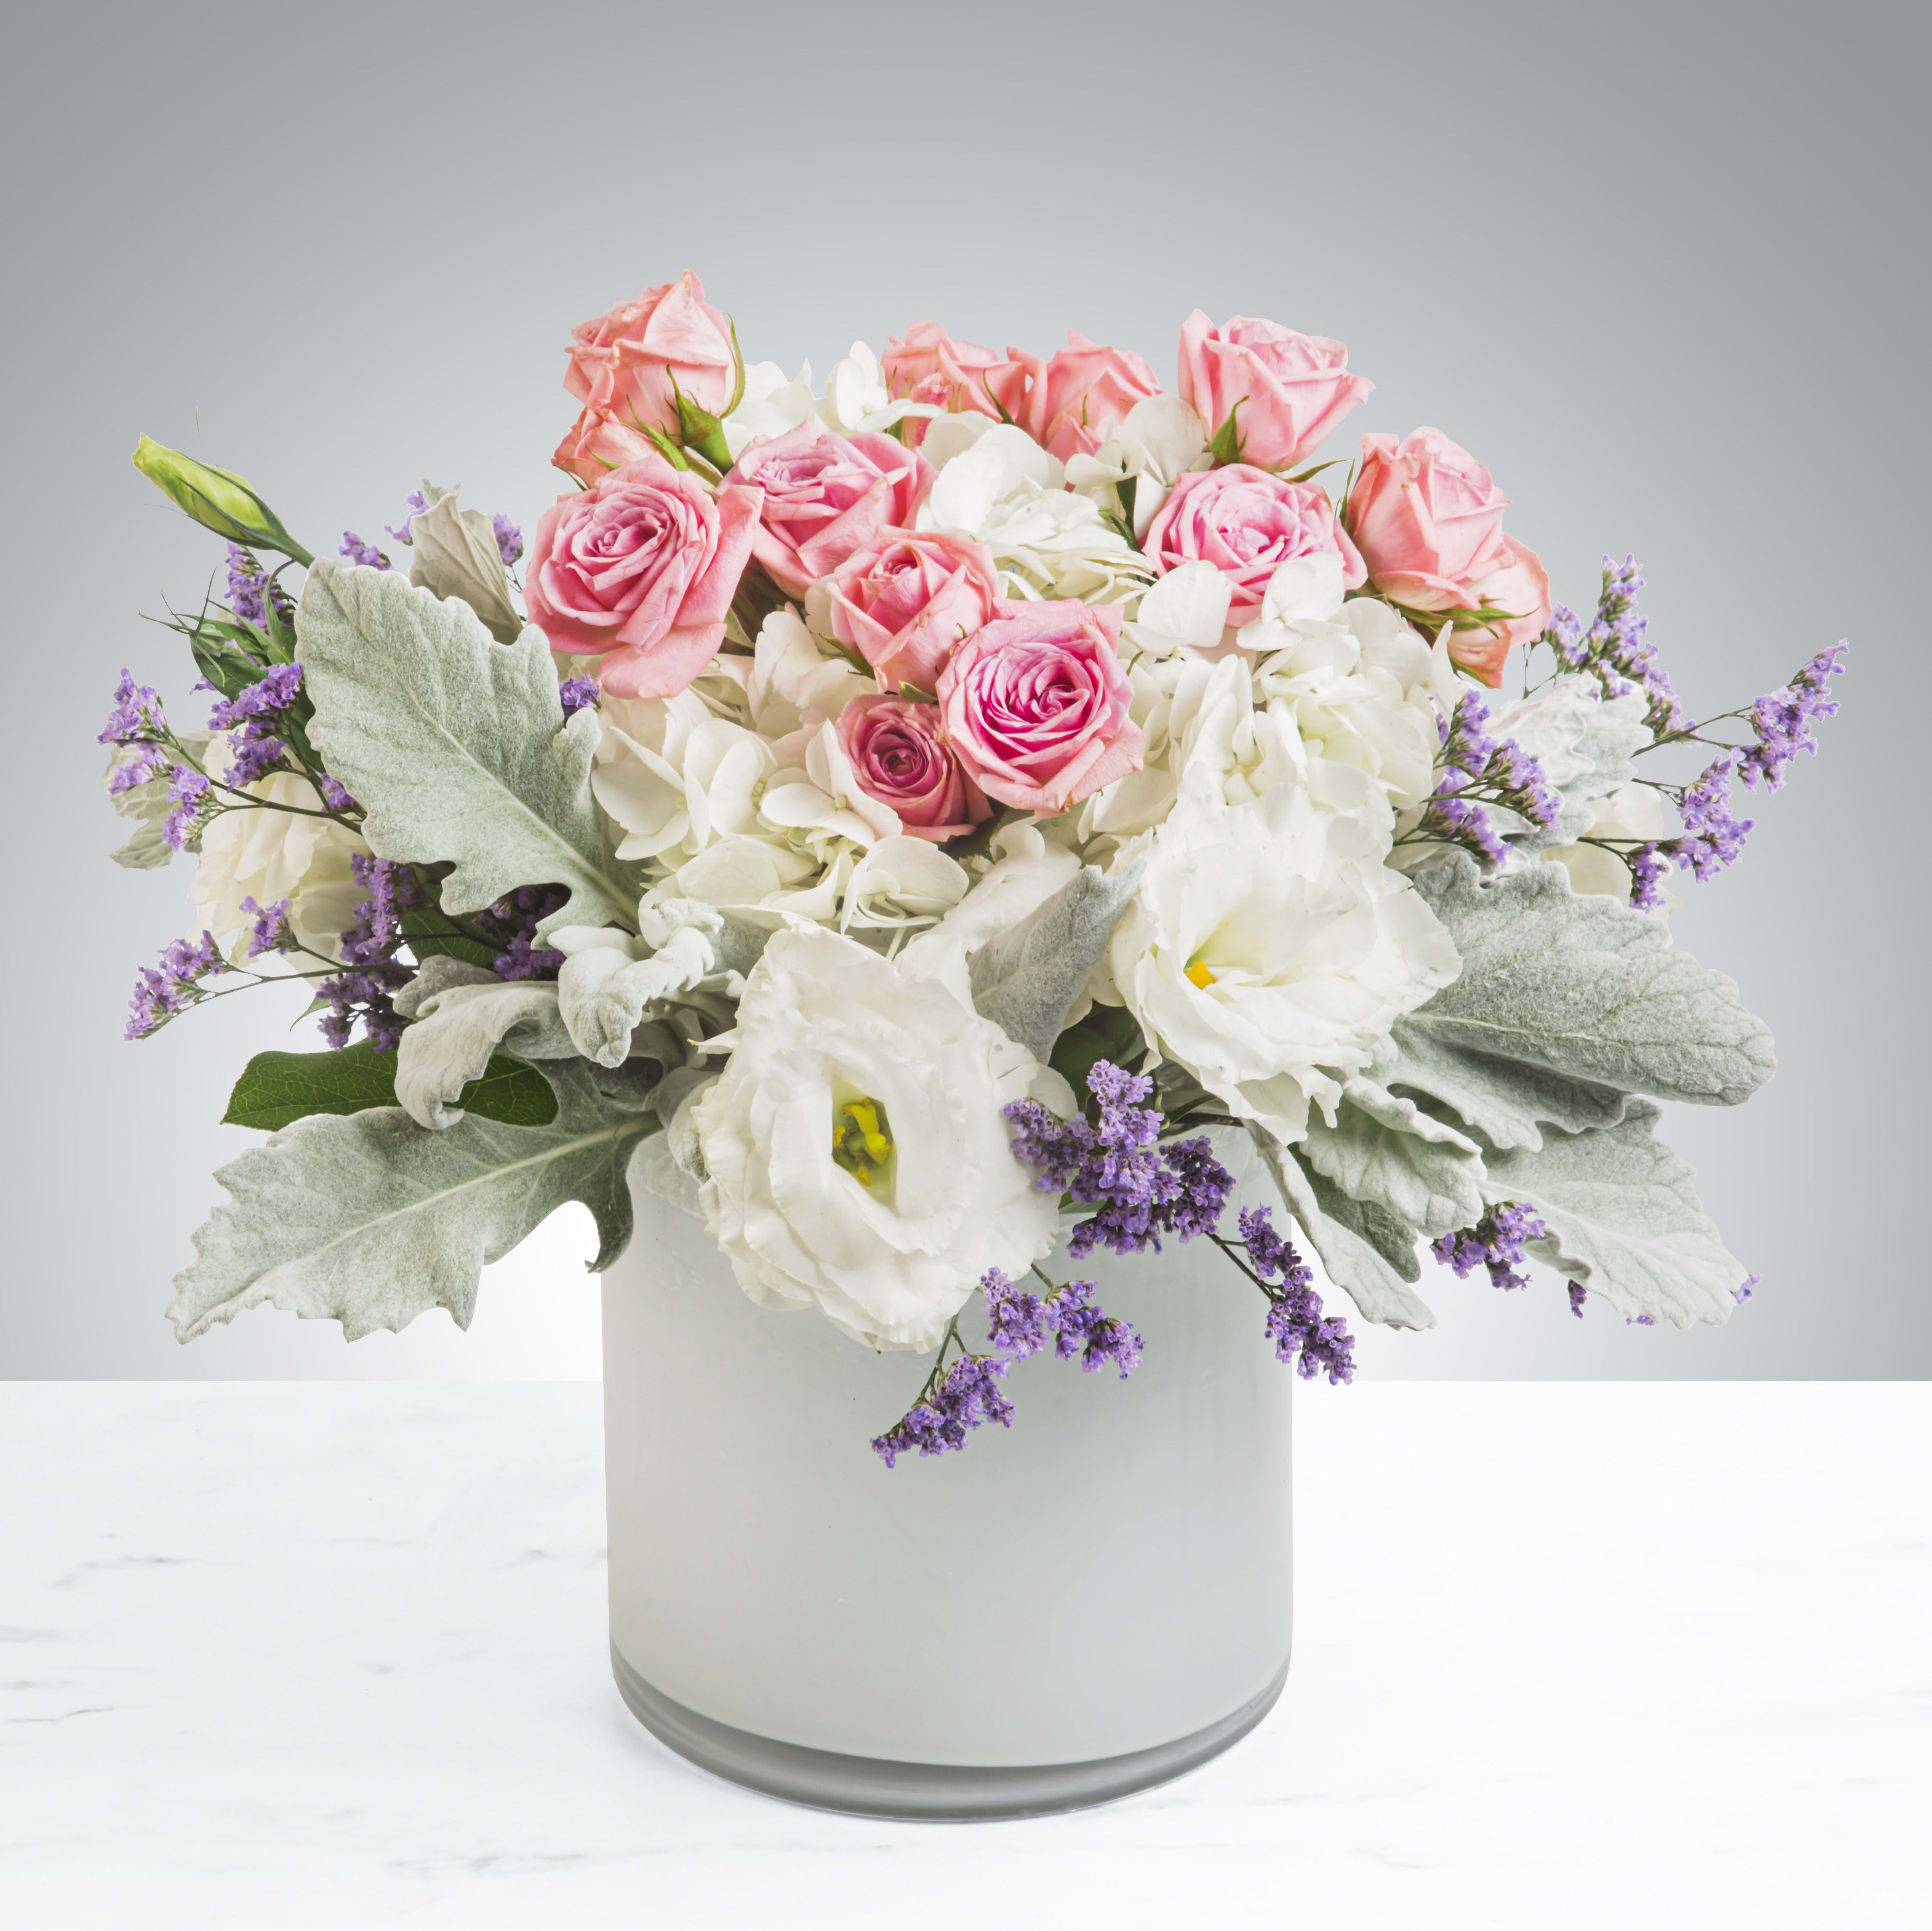 Sweet Cream by BloomNation™ - This angelic arrangement is as cute as it is pretty. Featuring the soft texture of lambs ear and pastel colors, Sweet Cream is a warm hug and smile. Perfect for welcoming a new baby, a birthday or making somebody's day a little sweeter. 